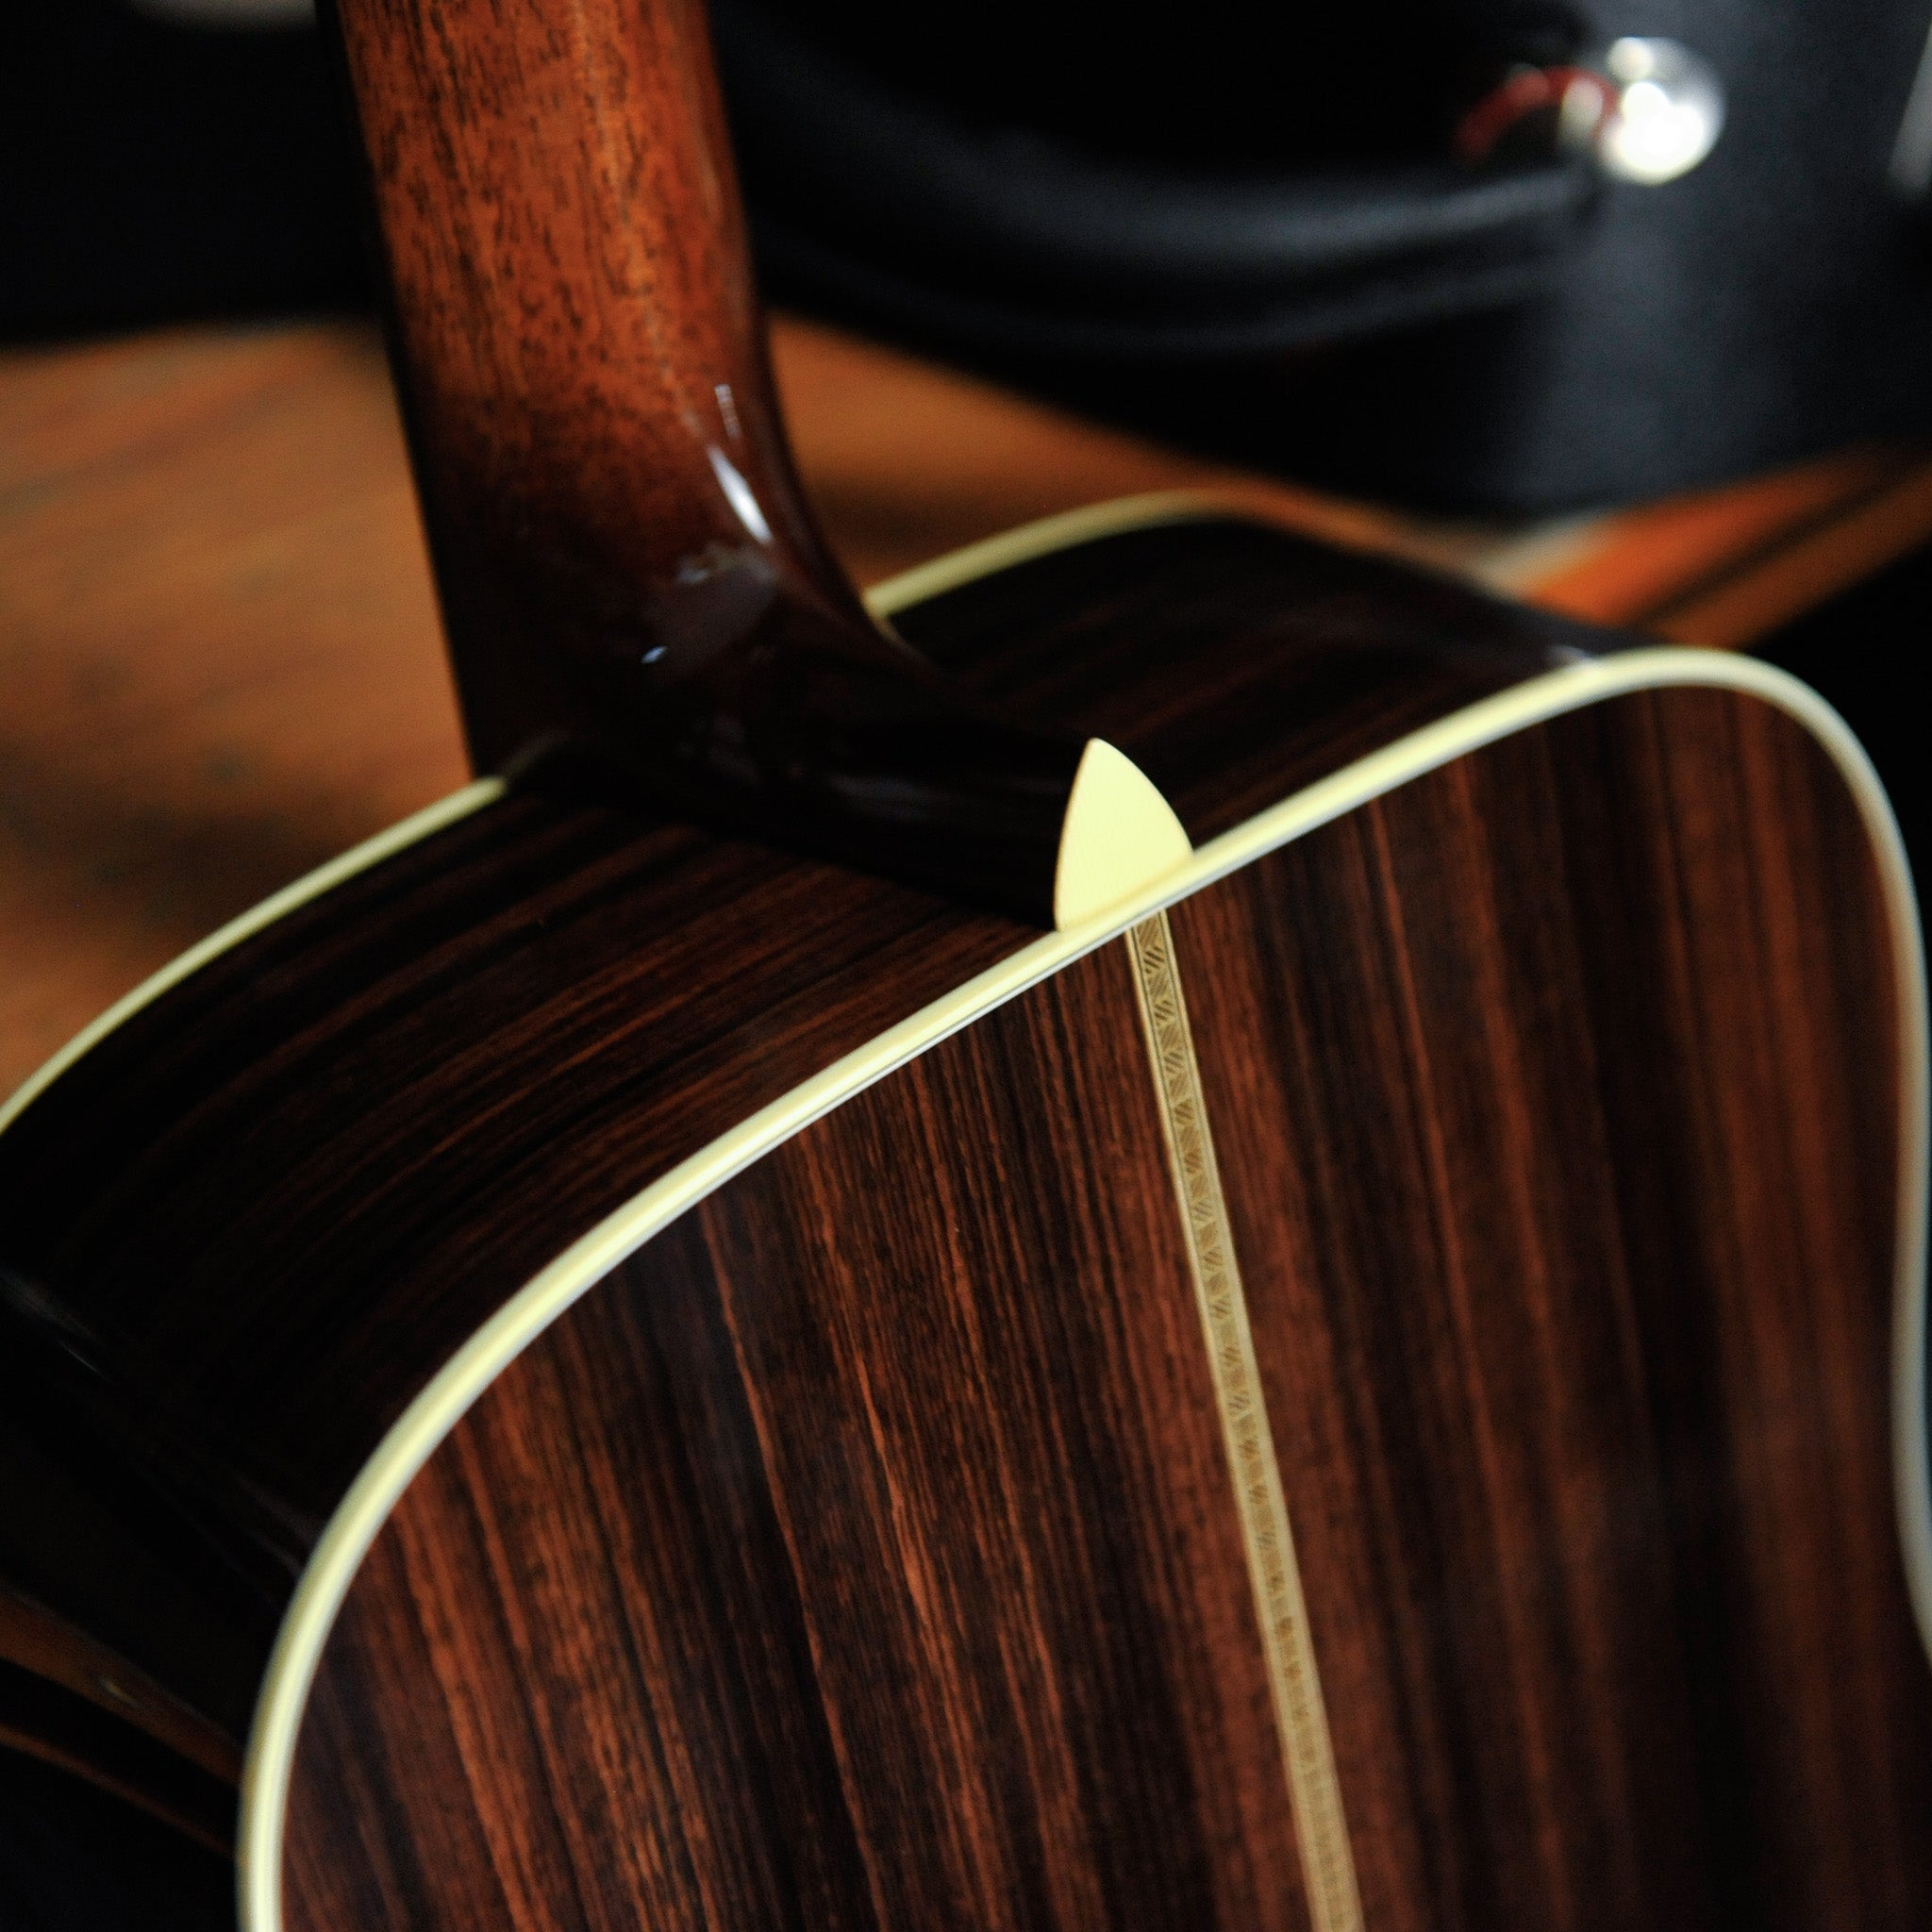 Collings D2H-T Traditional Series